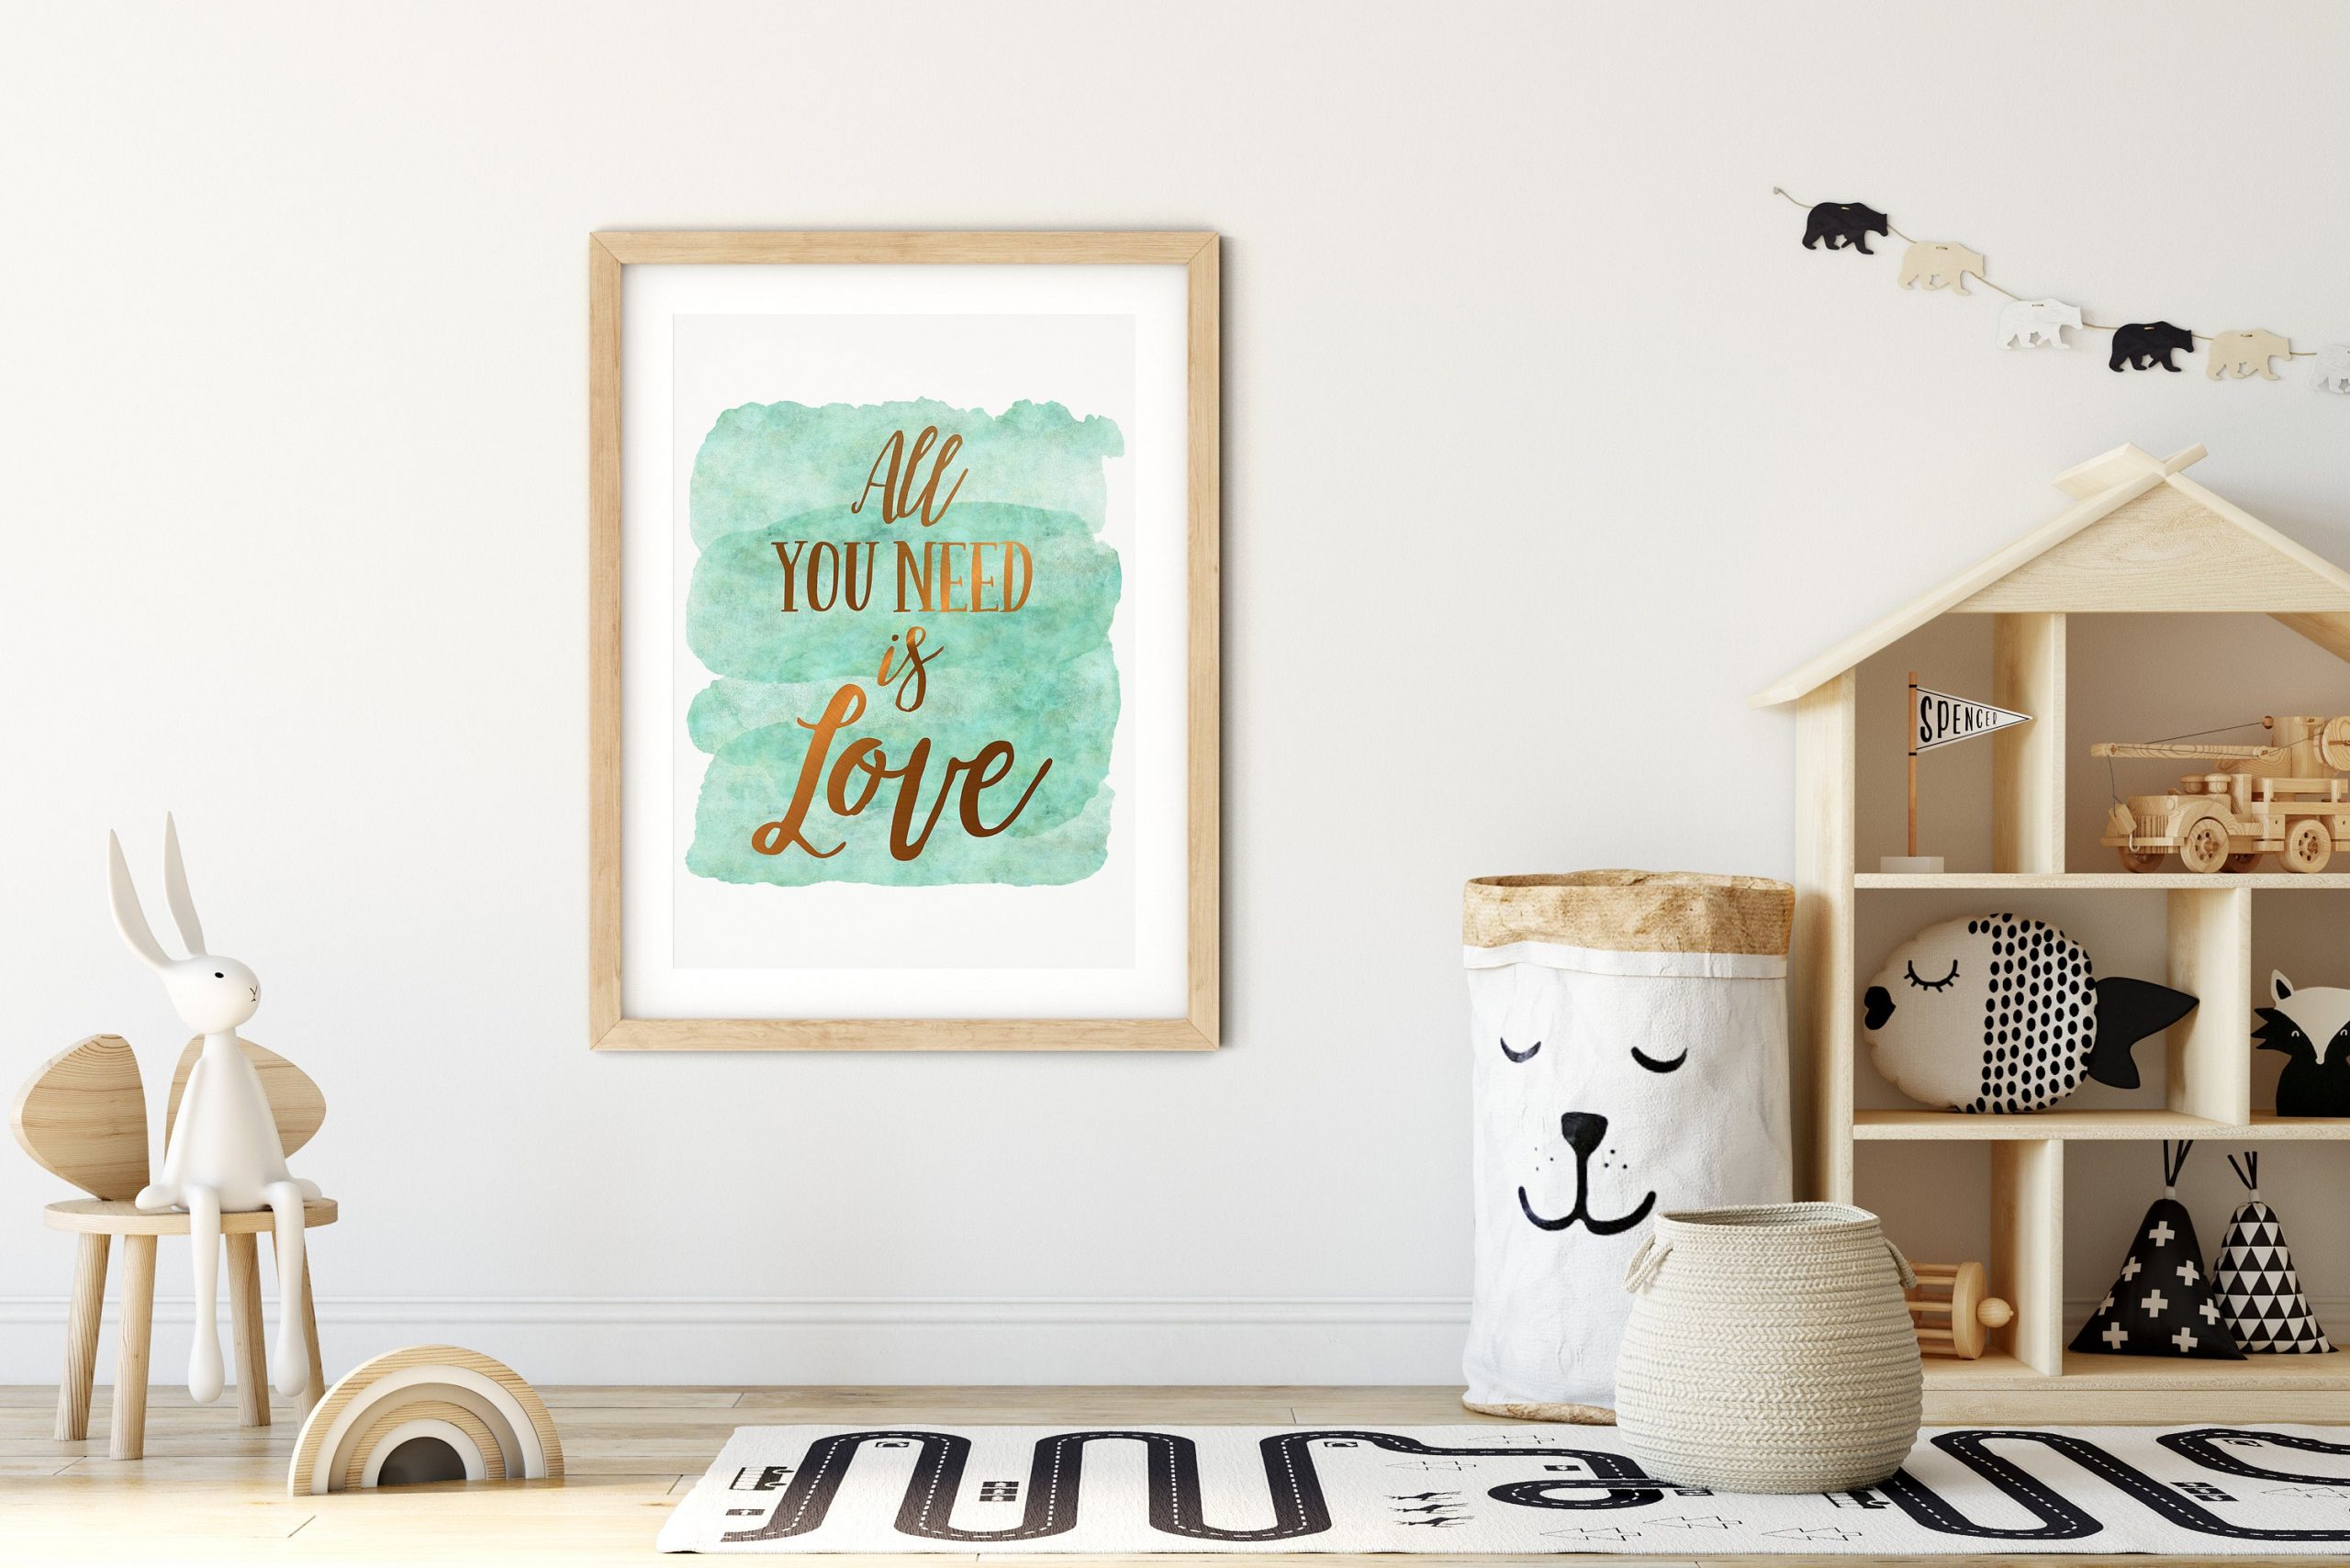 All You Need Is Love, Nursery Print, Inspirational Motivational Quotes,Wall Art